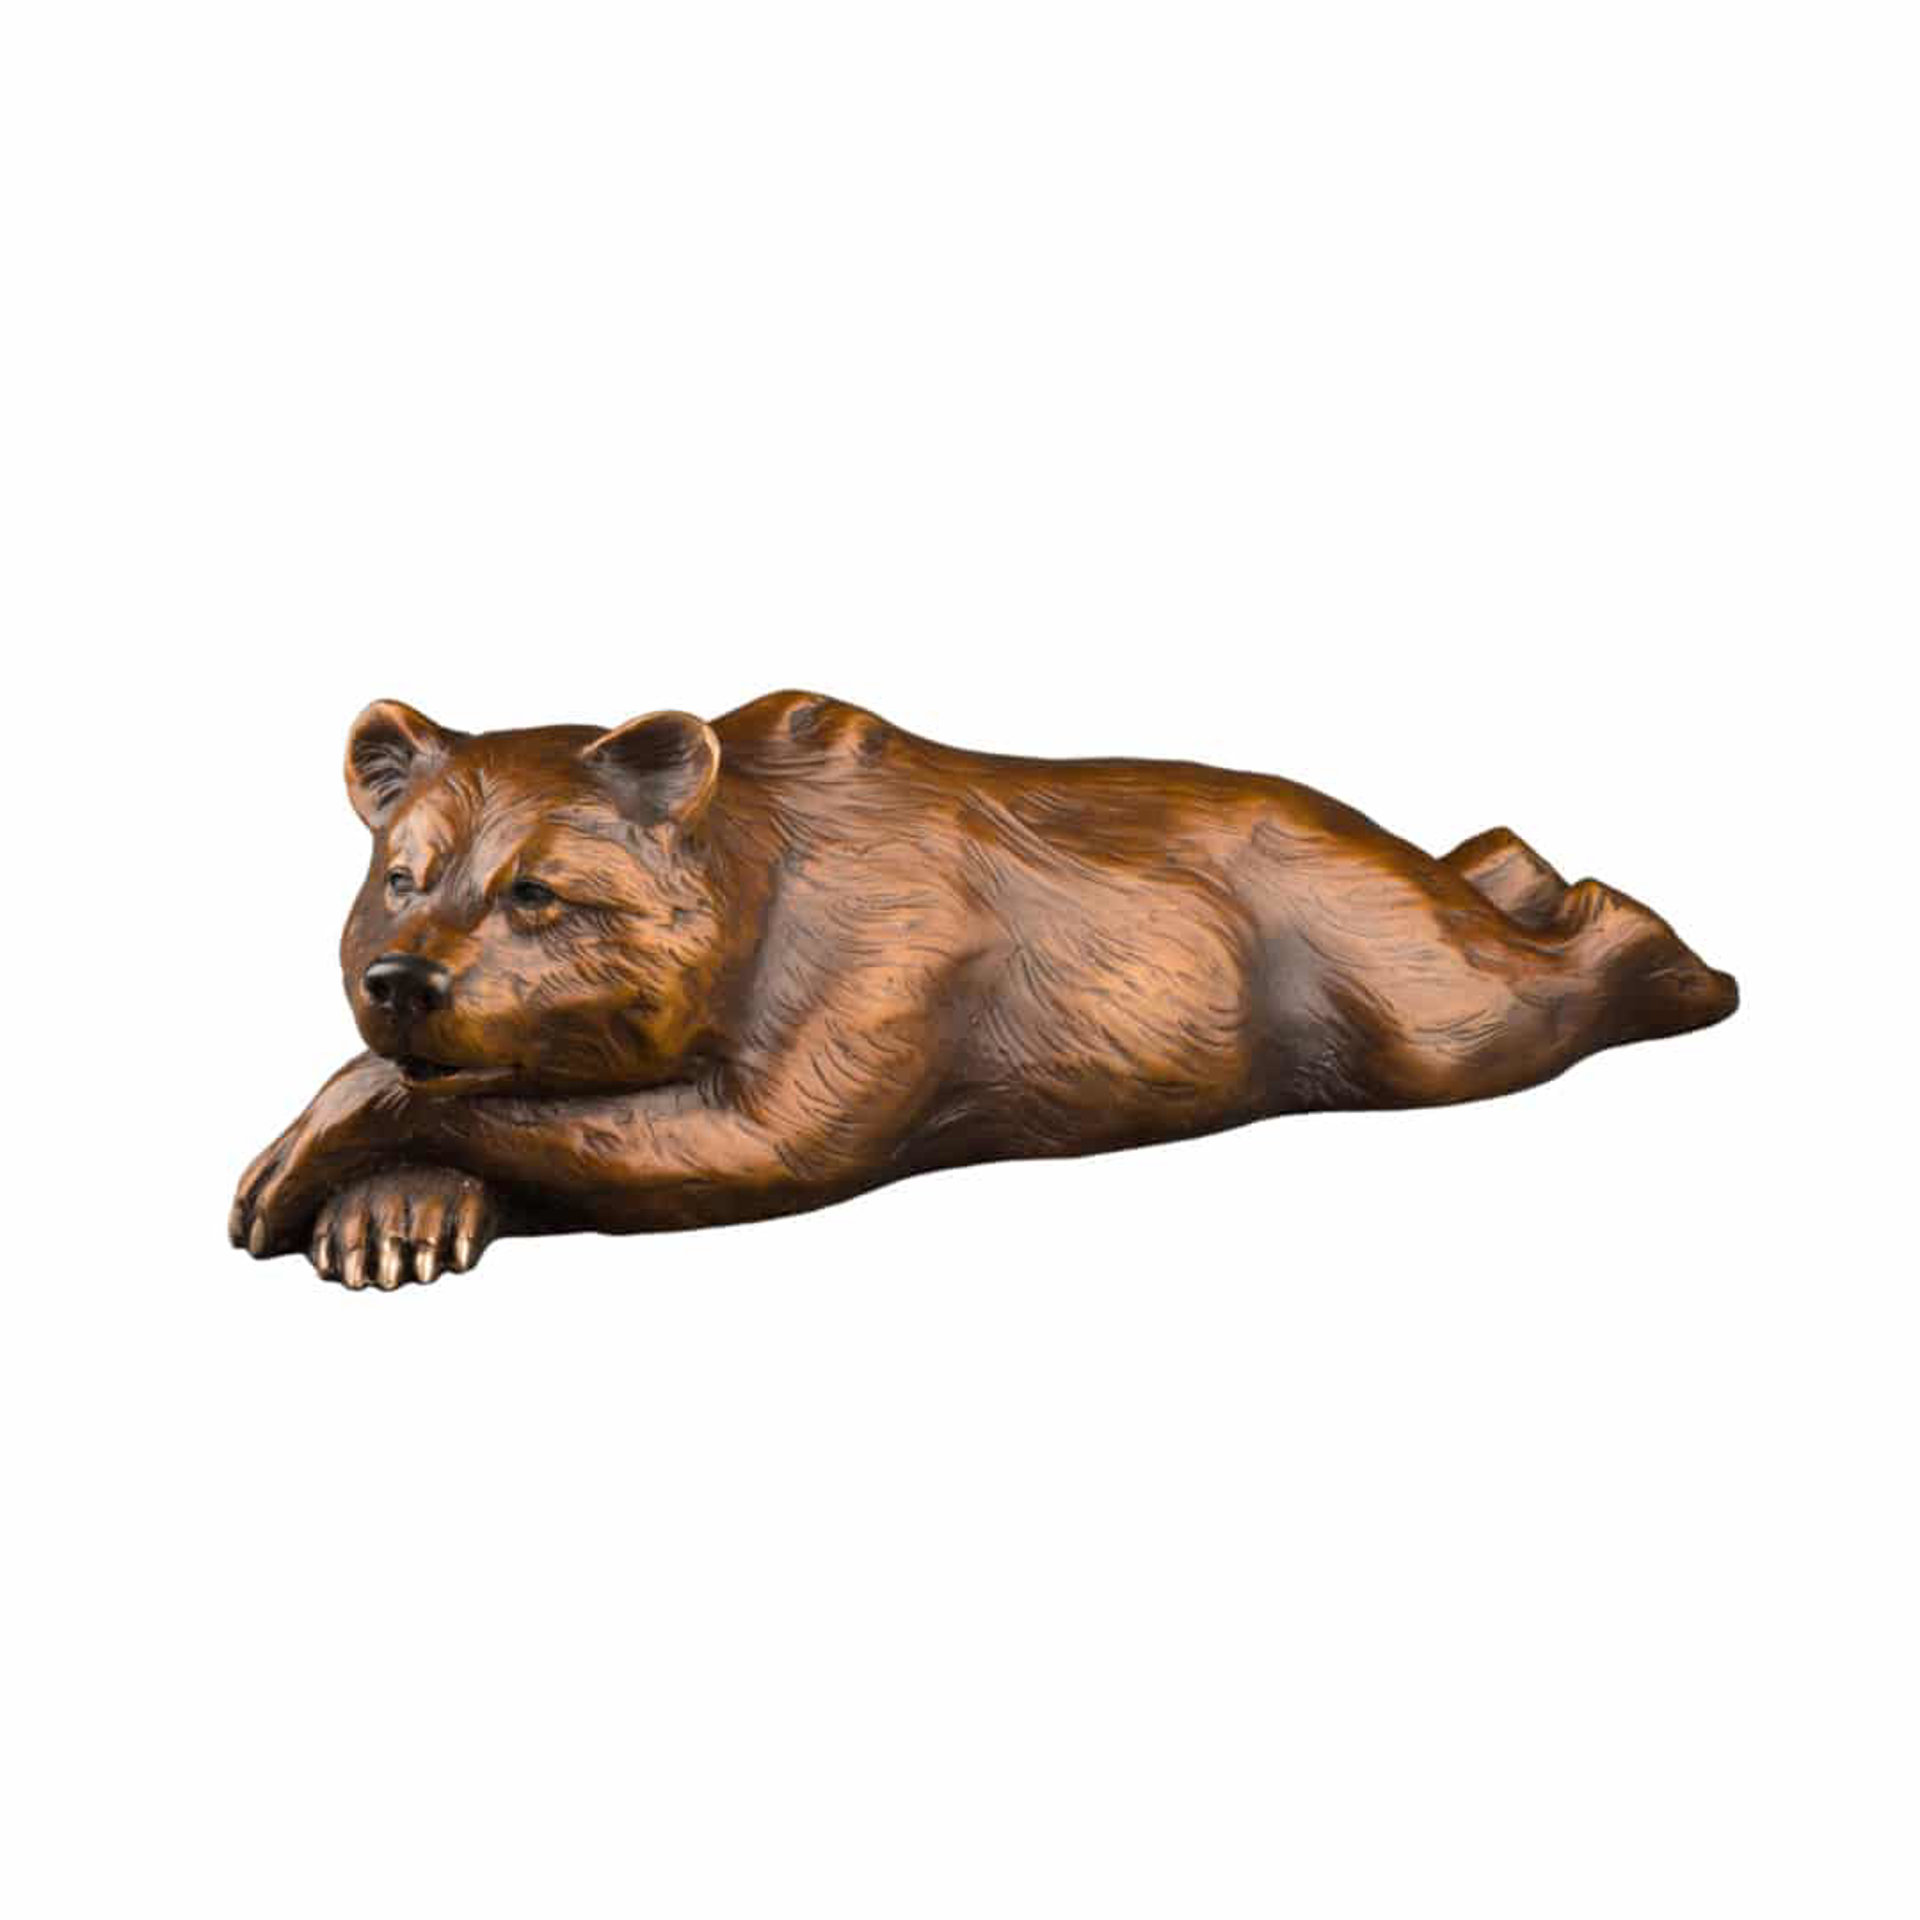 Bear Original Bronze Sculpture by Rip and Alison Caswell, Contemporary Fine Art, Modern Wildlife Art, Available At Gallery Wild